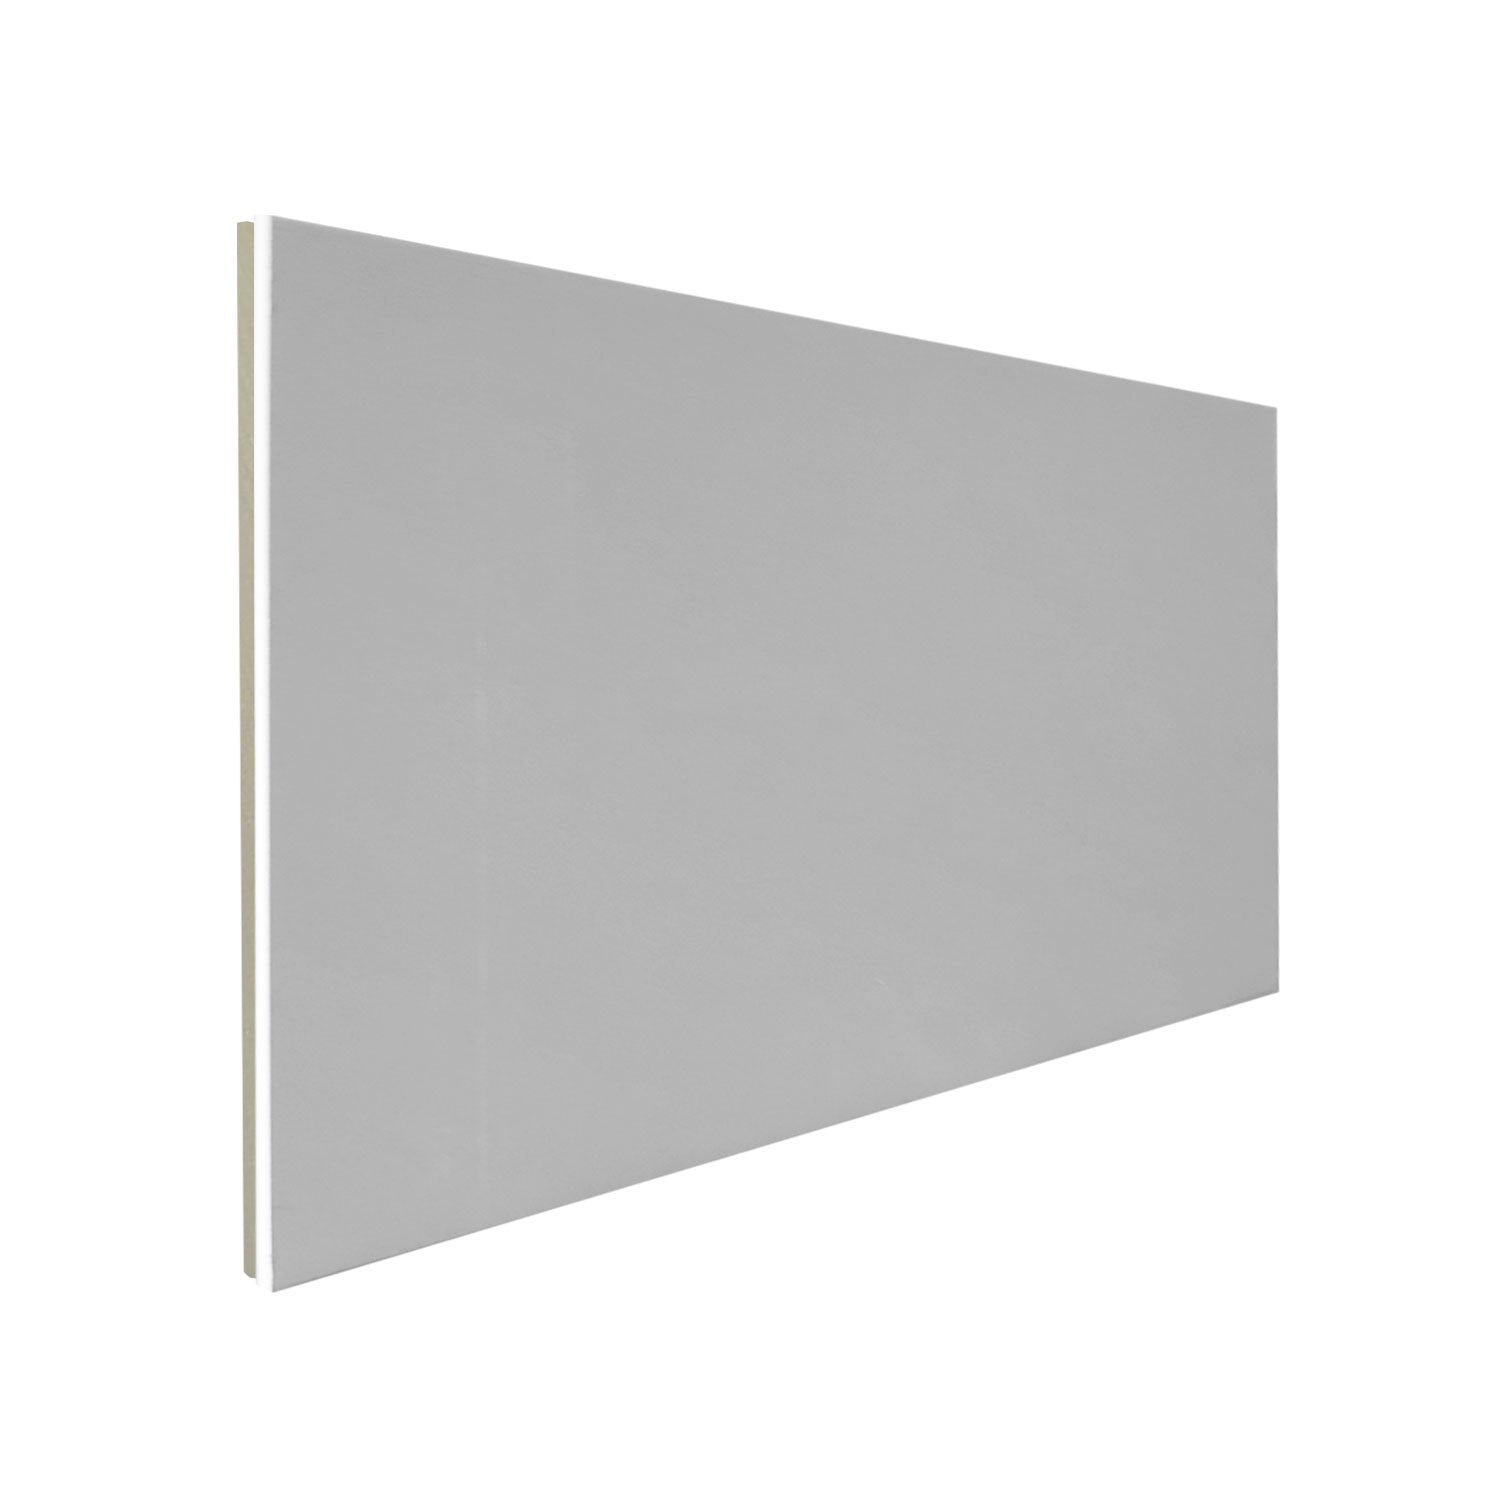 Thermal Check Plasterboard 8' x 4' x 22mm